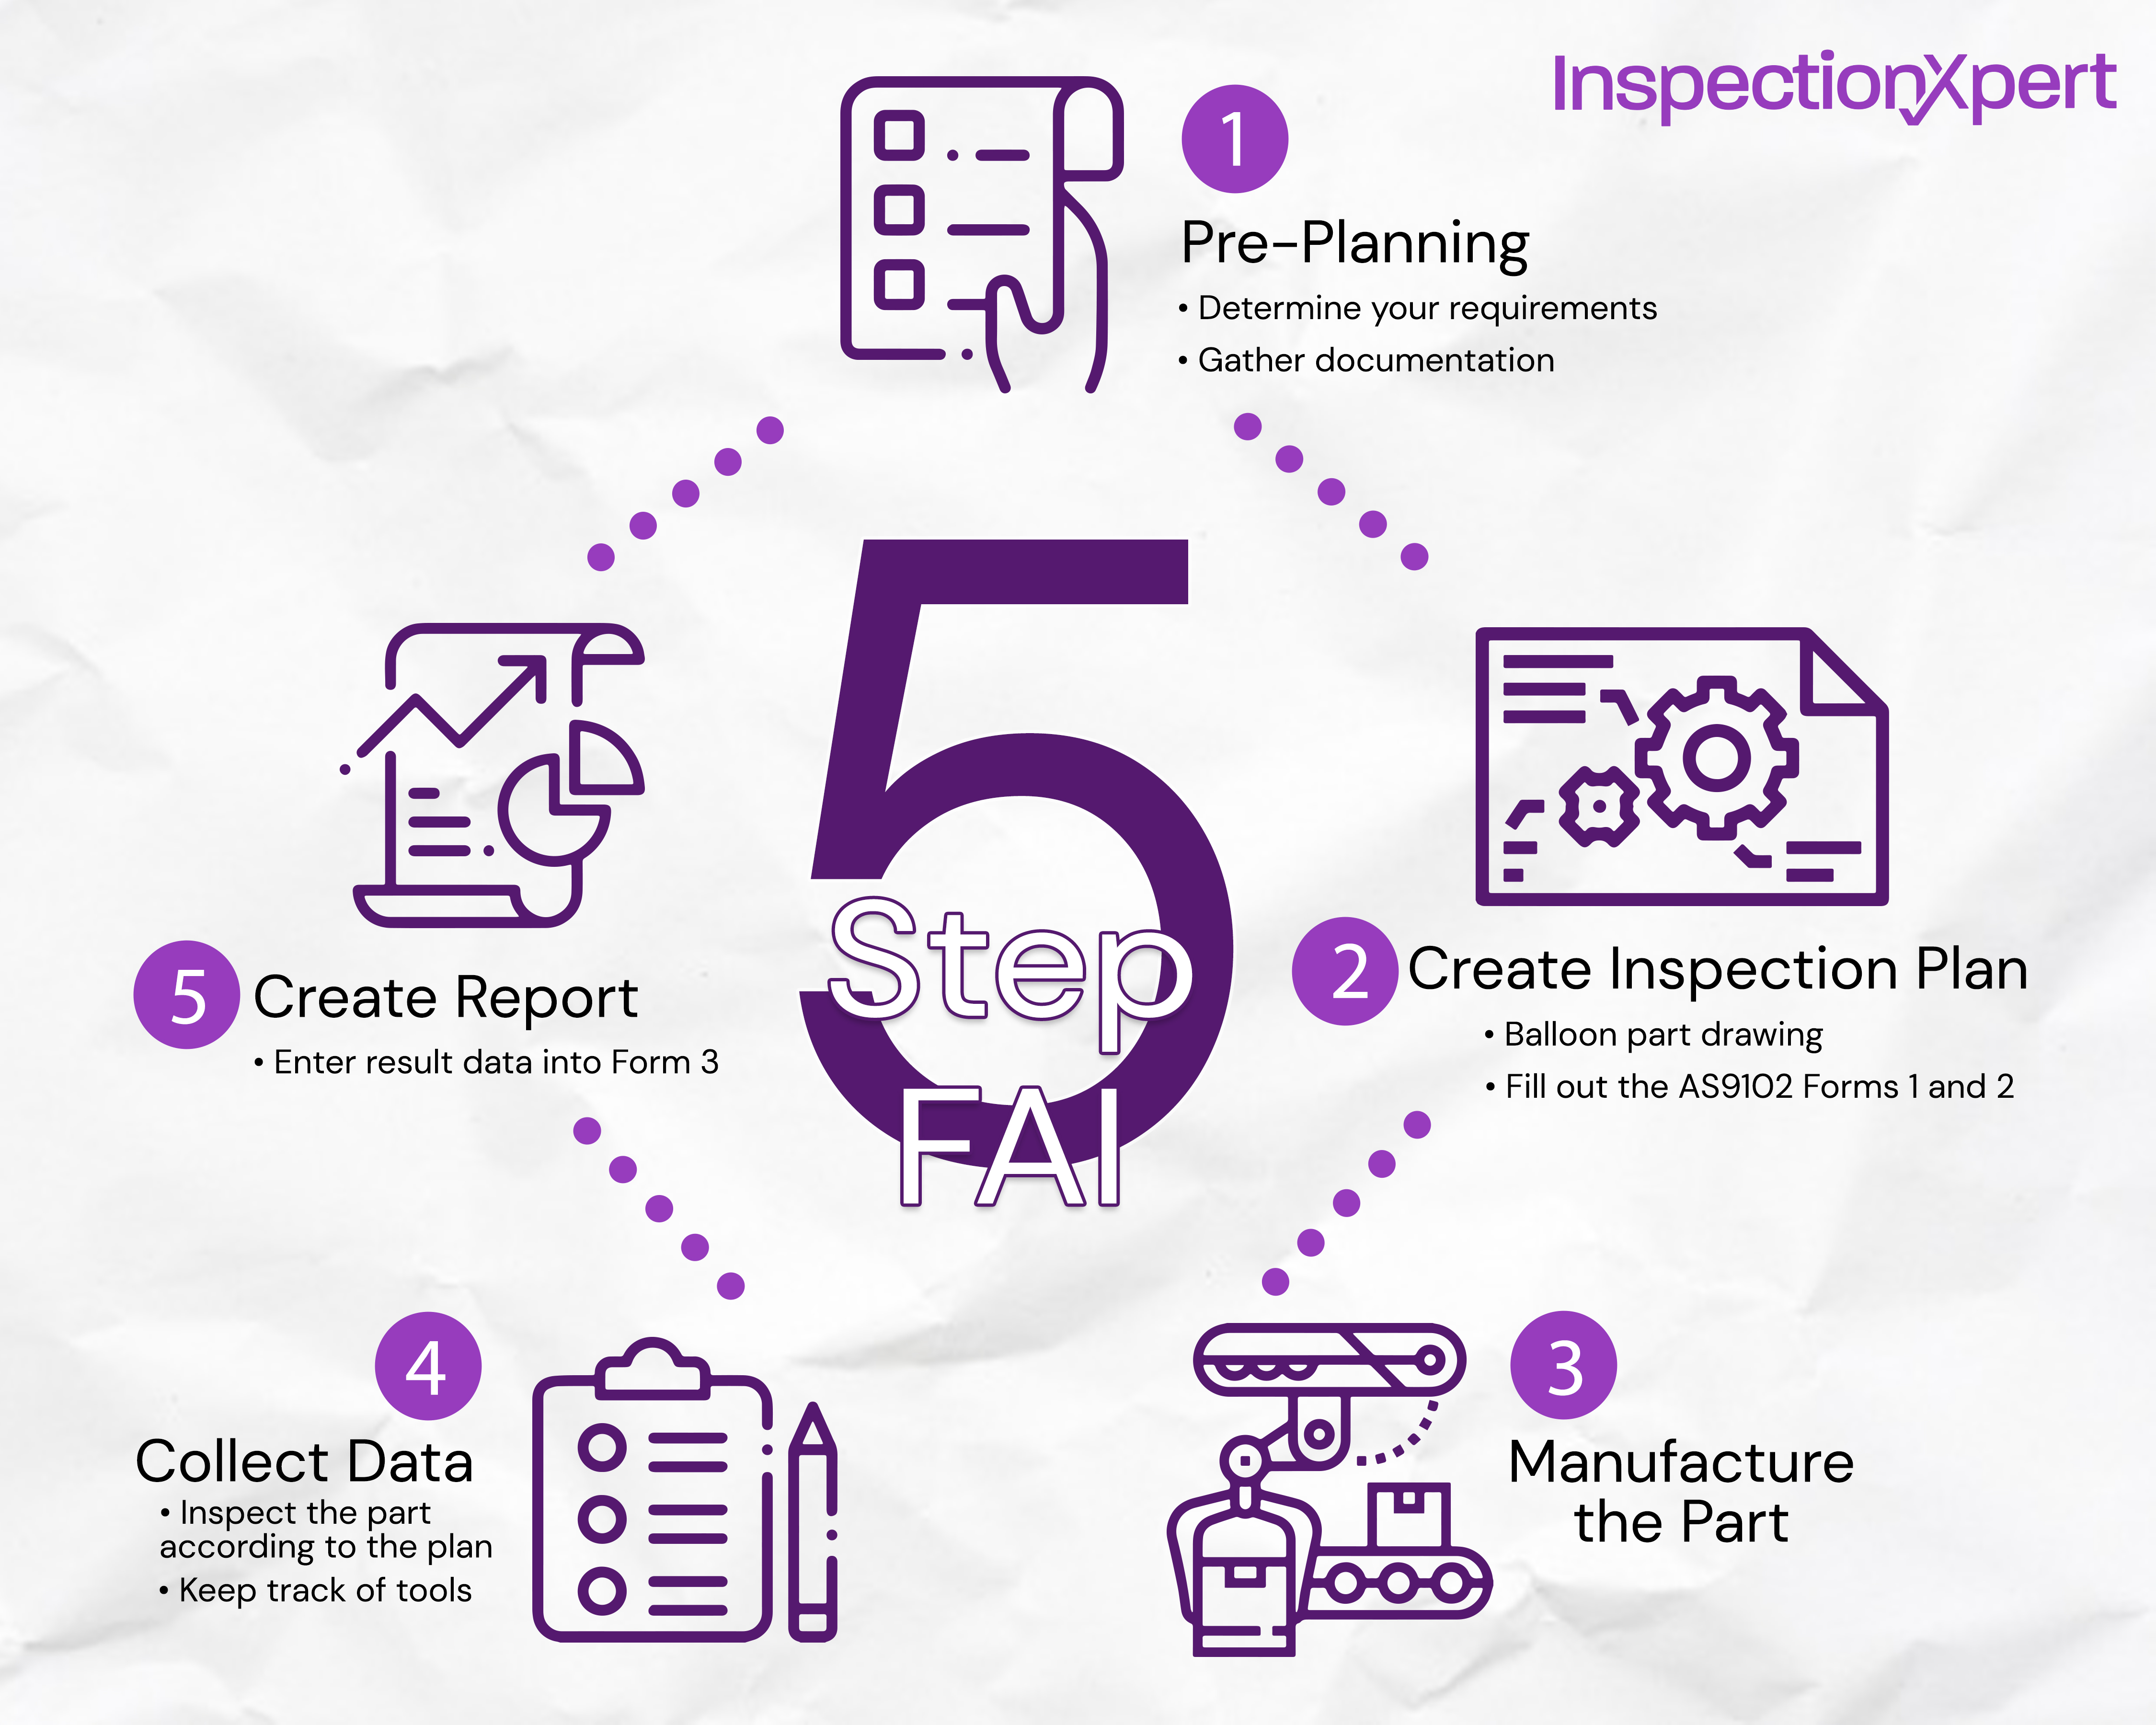 5 Steps to create a First Article Inspection Report: Pre-plan your FAI, create inspection plan, manufacture part, collect data, and create report.